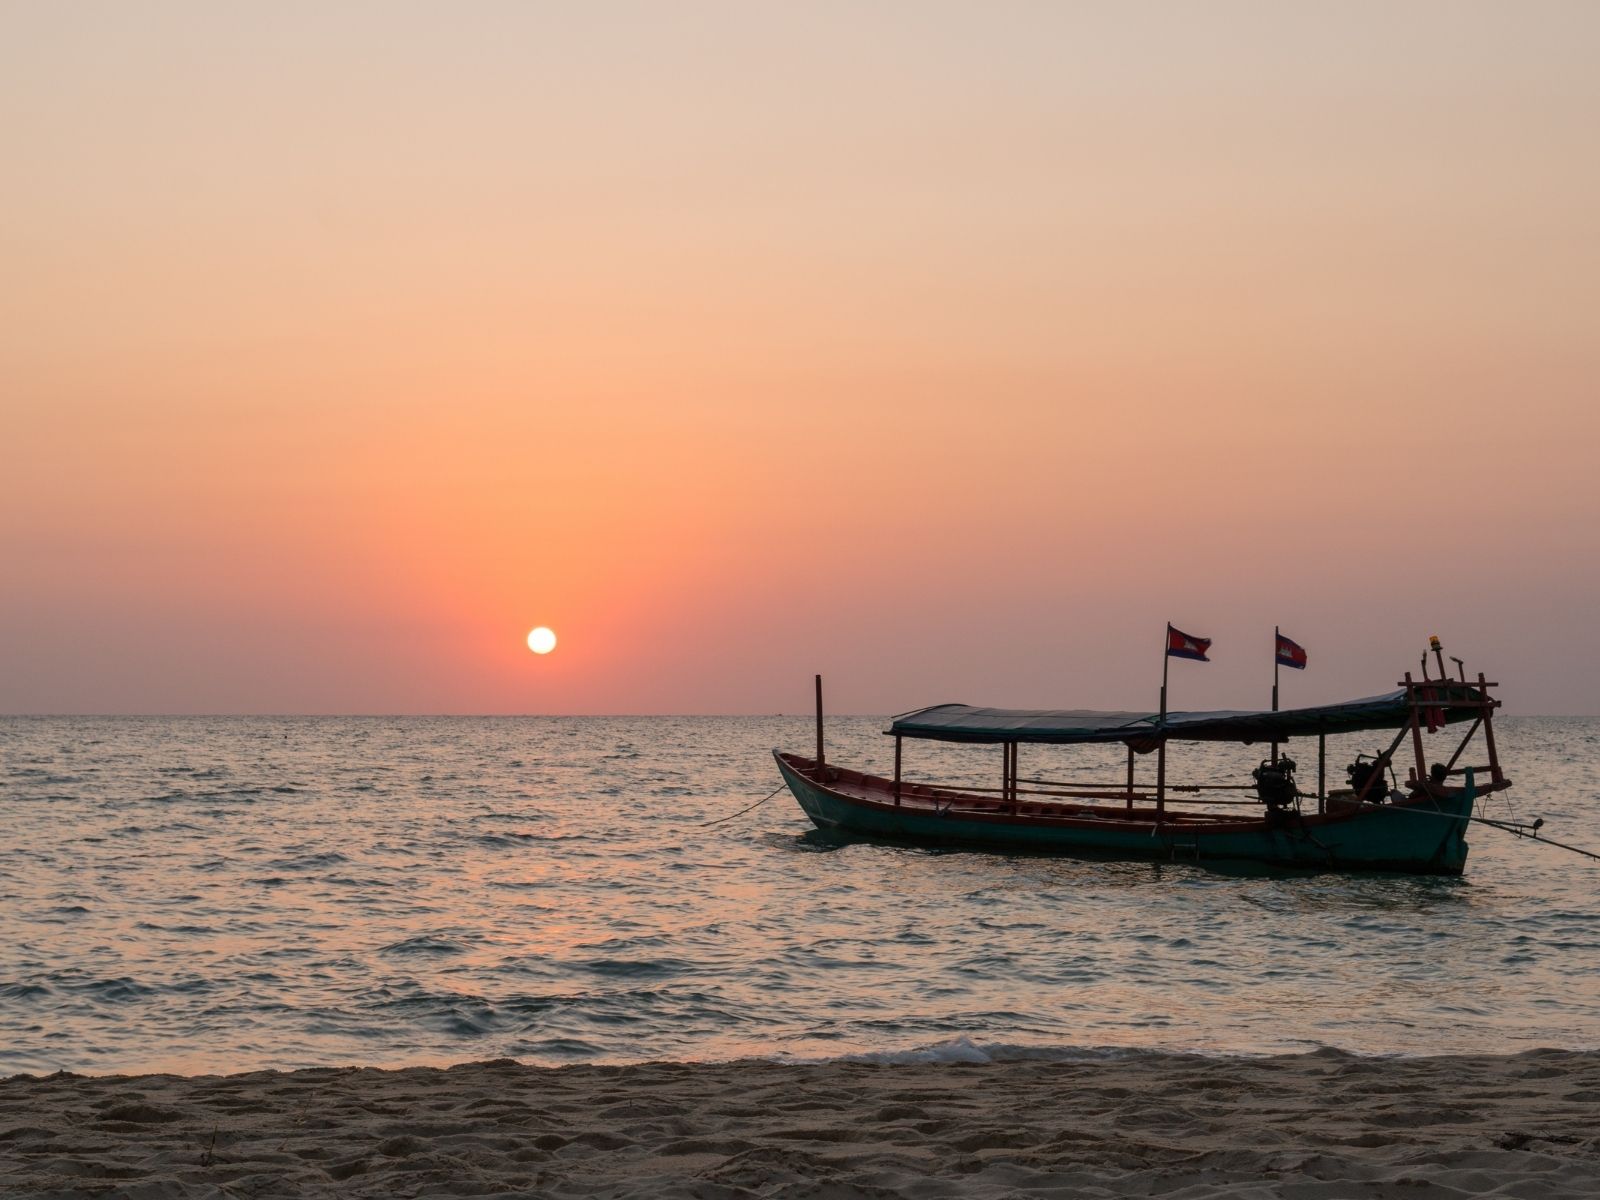 Sunset with floating boat in Otres beach